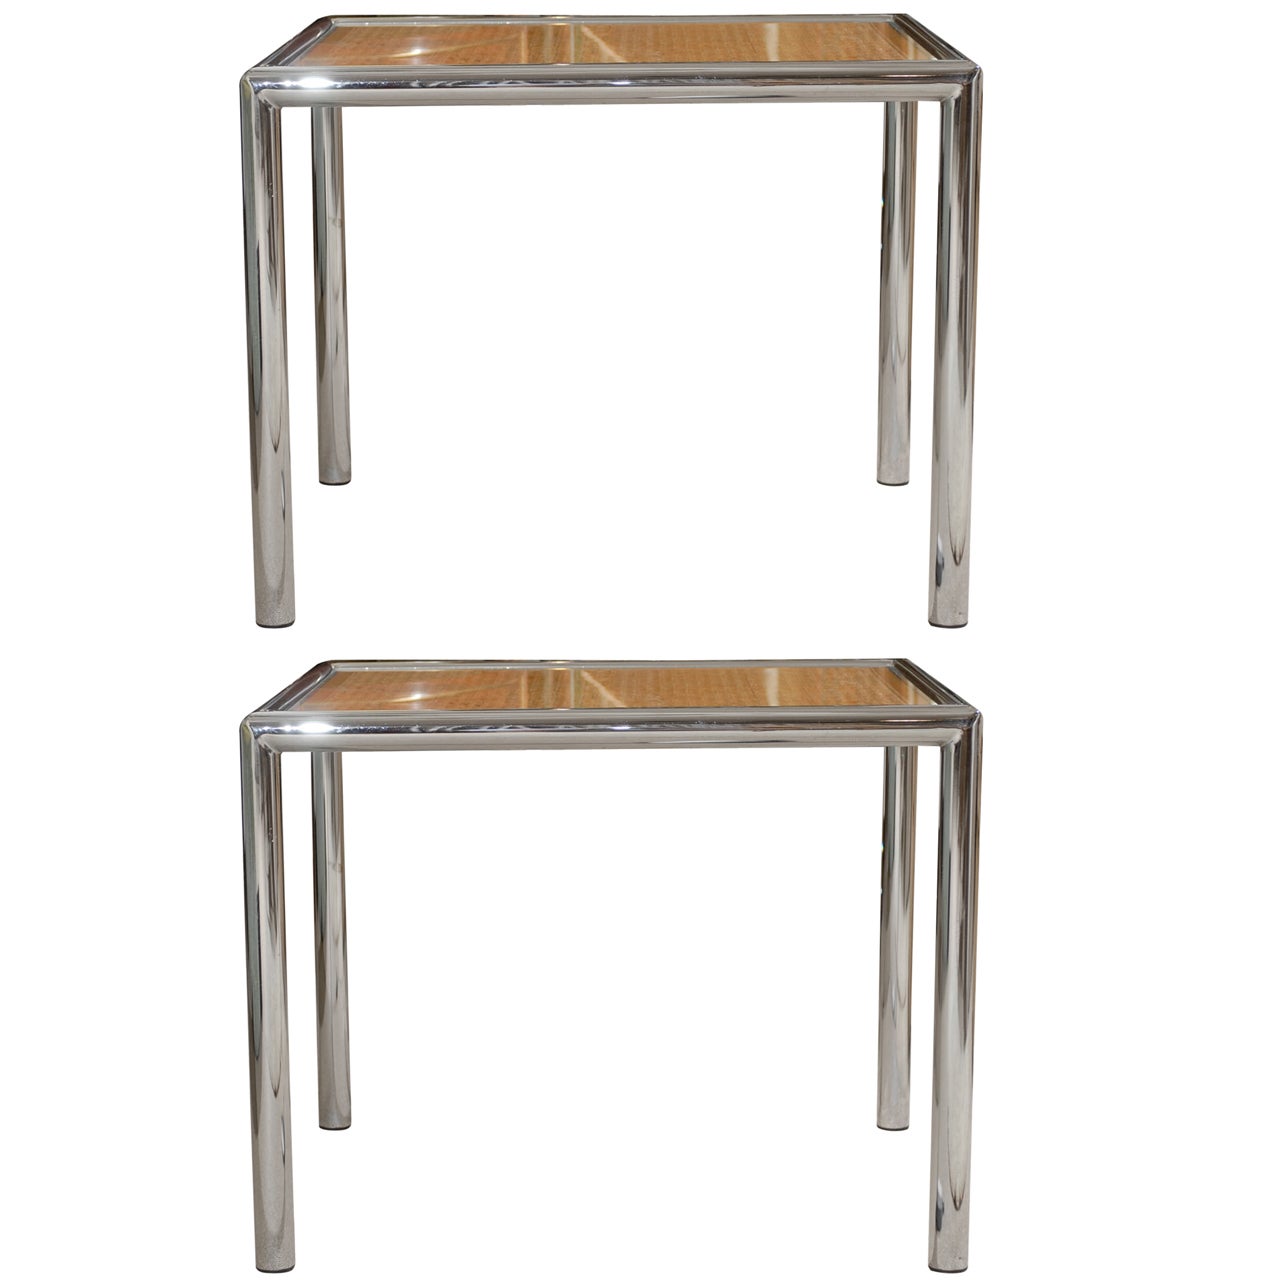 Pristine Pair of Cane and Chrome End or Side Tables, circa 1975